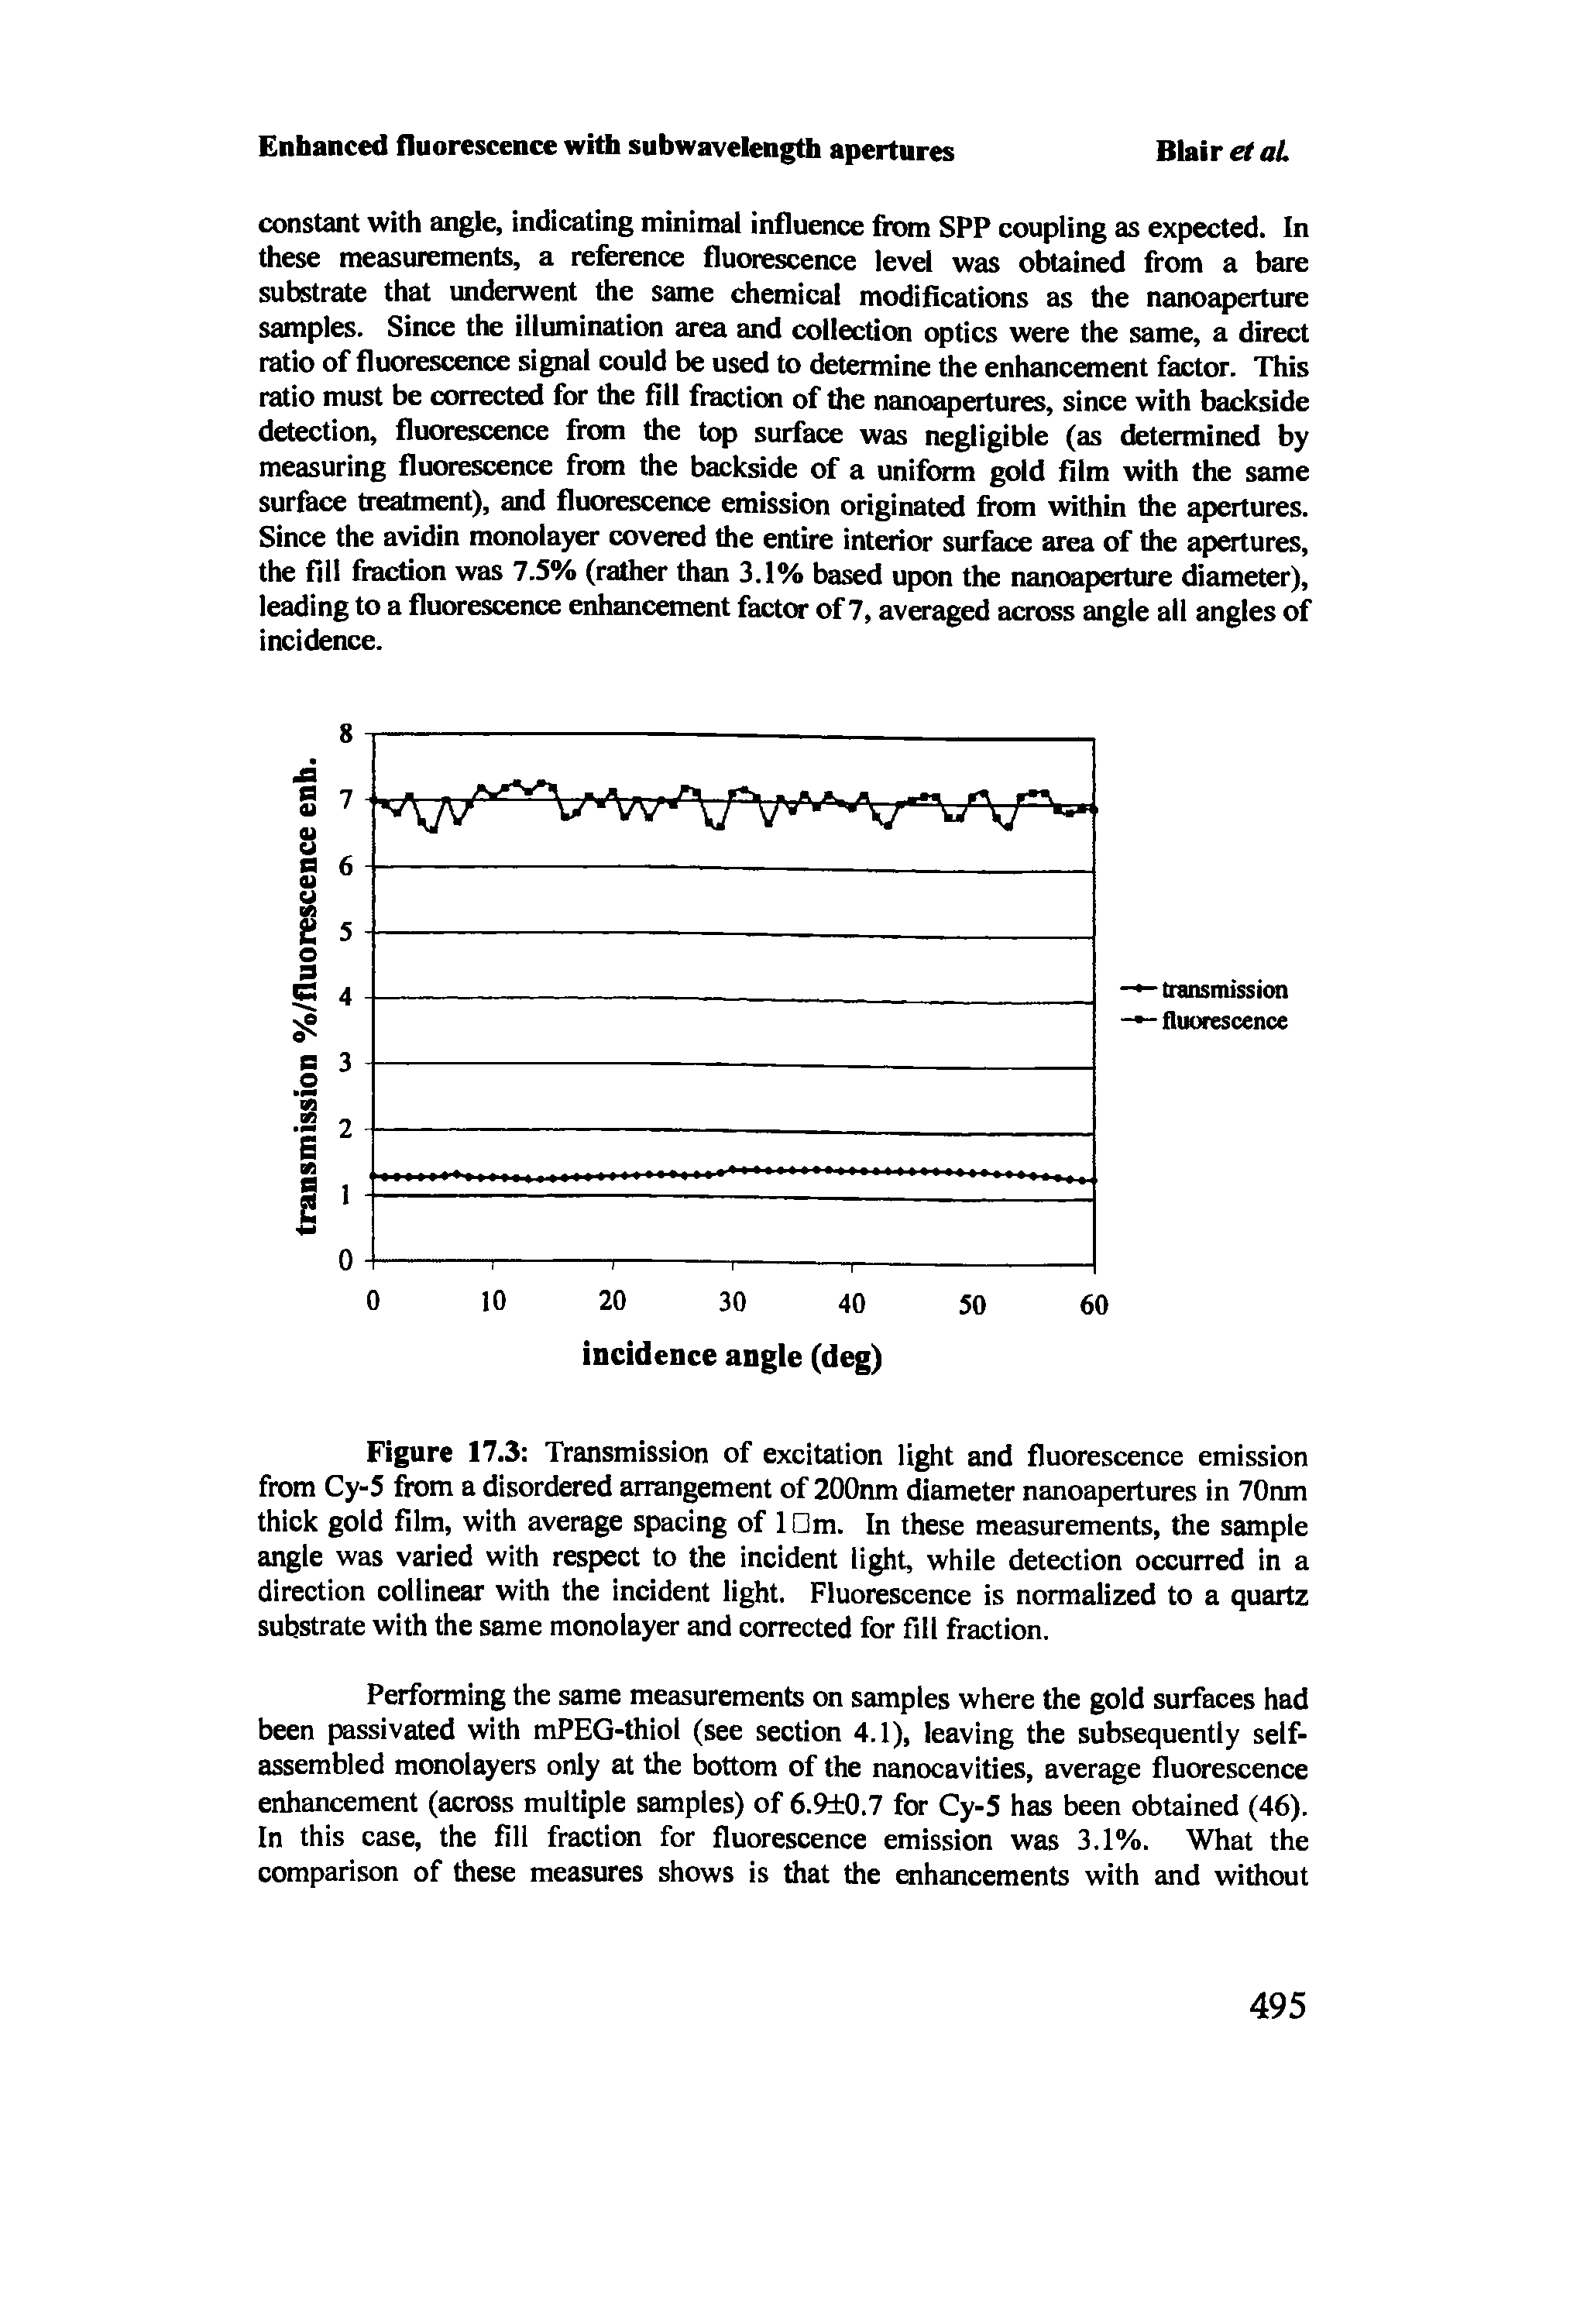 Figure 17.3 Transmission of excitation light and fluorescence emission from Cy-5 from a disordered arrangement of 200nm diameter nanoapertures in 70nm thick gold film, with average spacing of IDm. In these measurements, the sample angle was varied with respect to the incident light, while detection occurred in a direction collinear with the incident light. Fluorescence is normalized to a quartz substrate with the same monolayer and corrected for fill fraction.